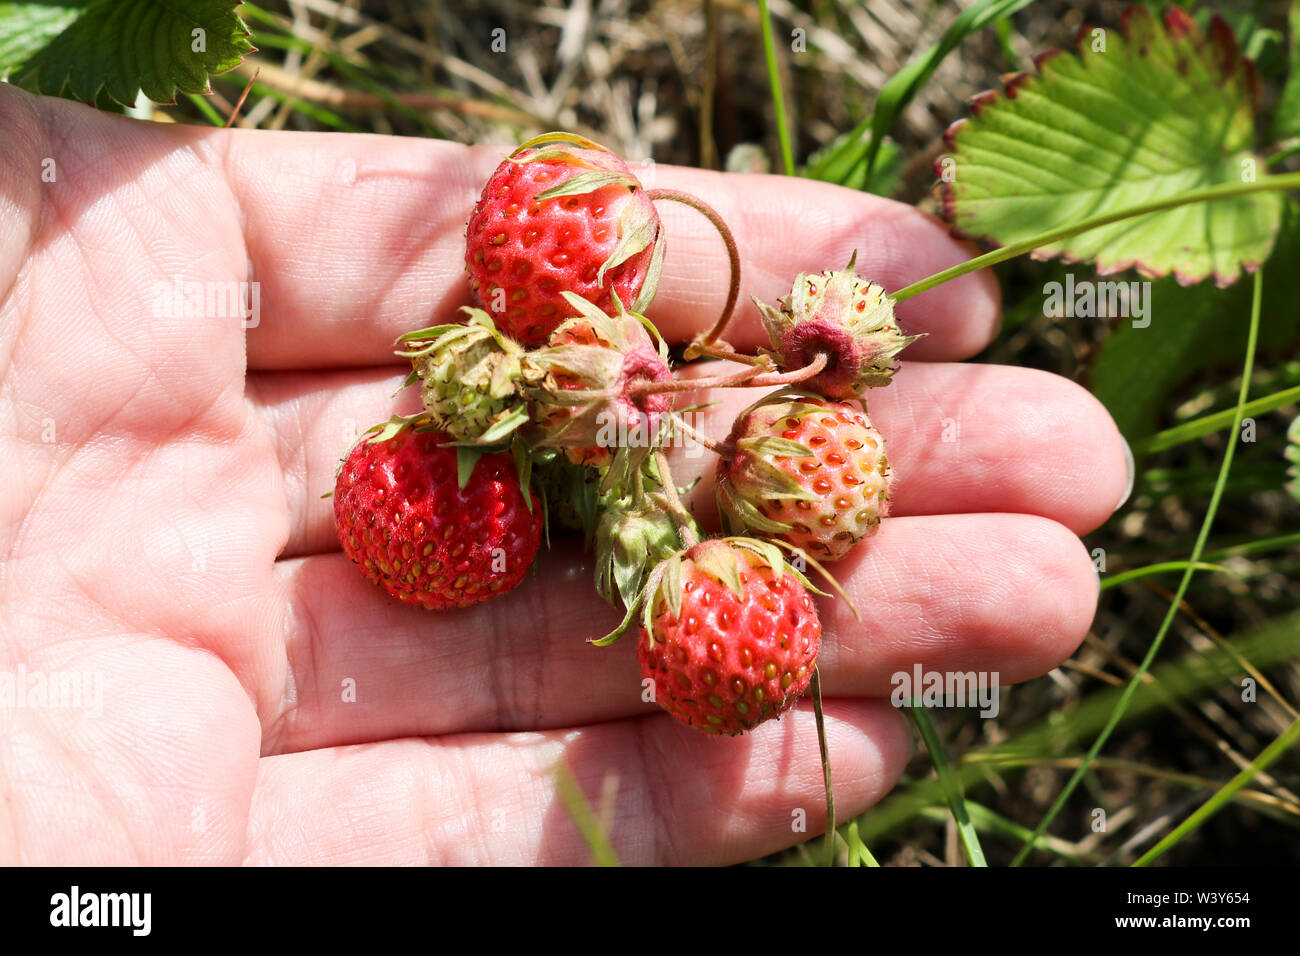 Ripe red berries wild strawberry meadow (Fragaria viridis) in the woman hand. Fruiting strawberry plant. Stock Photo